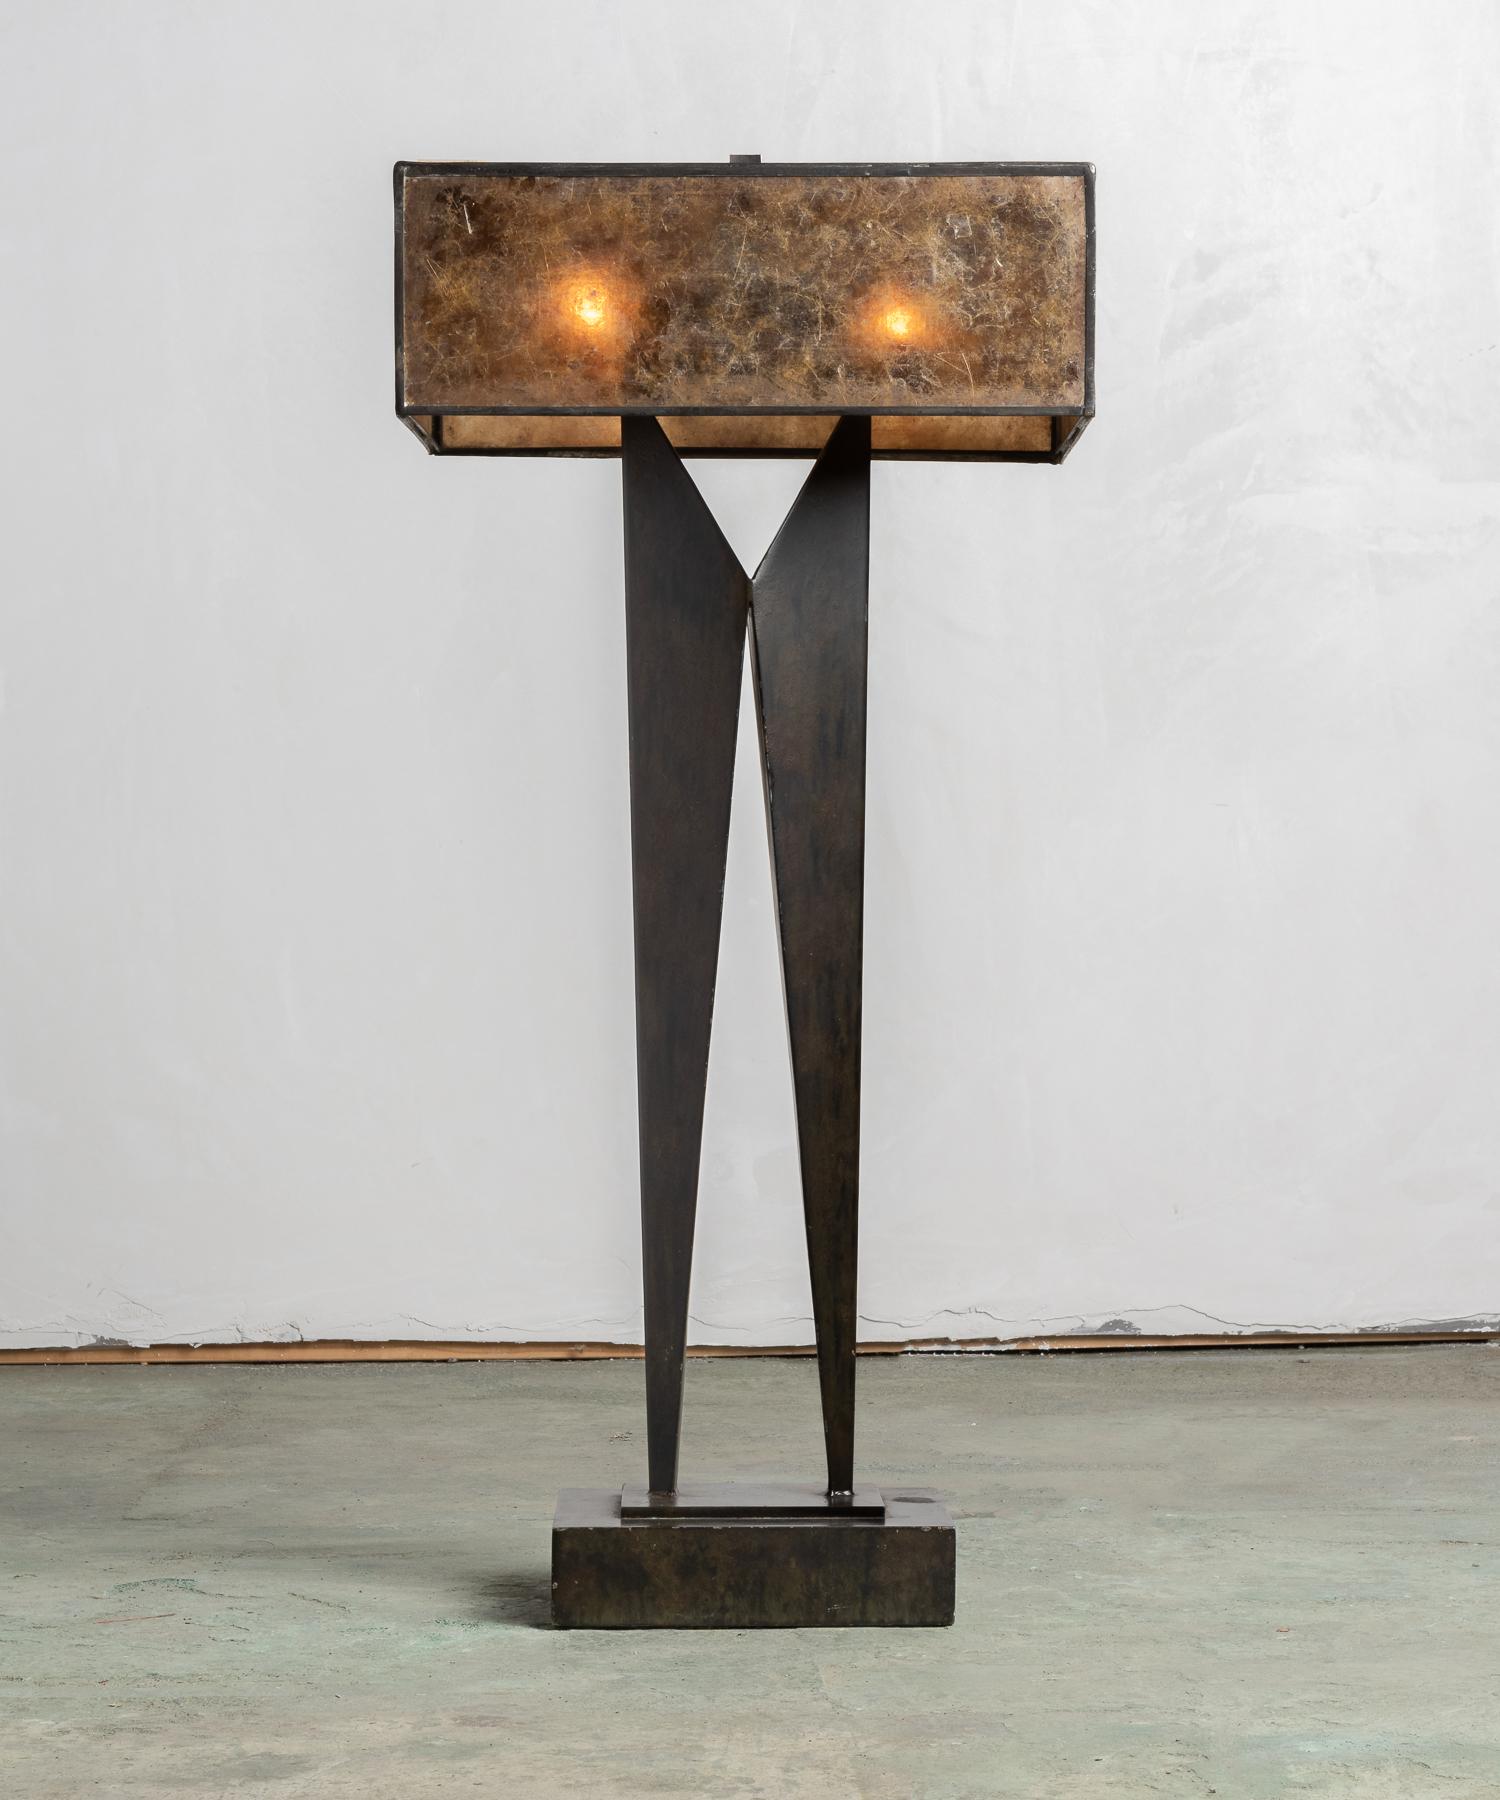 Modernist sculptural table lamp, France, circa 1950.

Unique metal lamp with original mica shade.